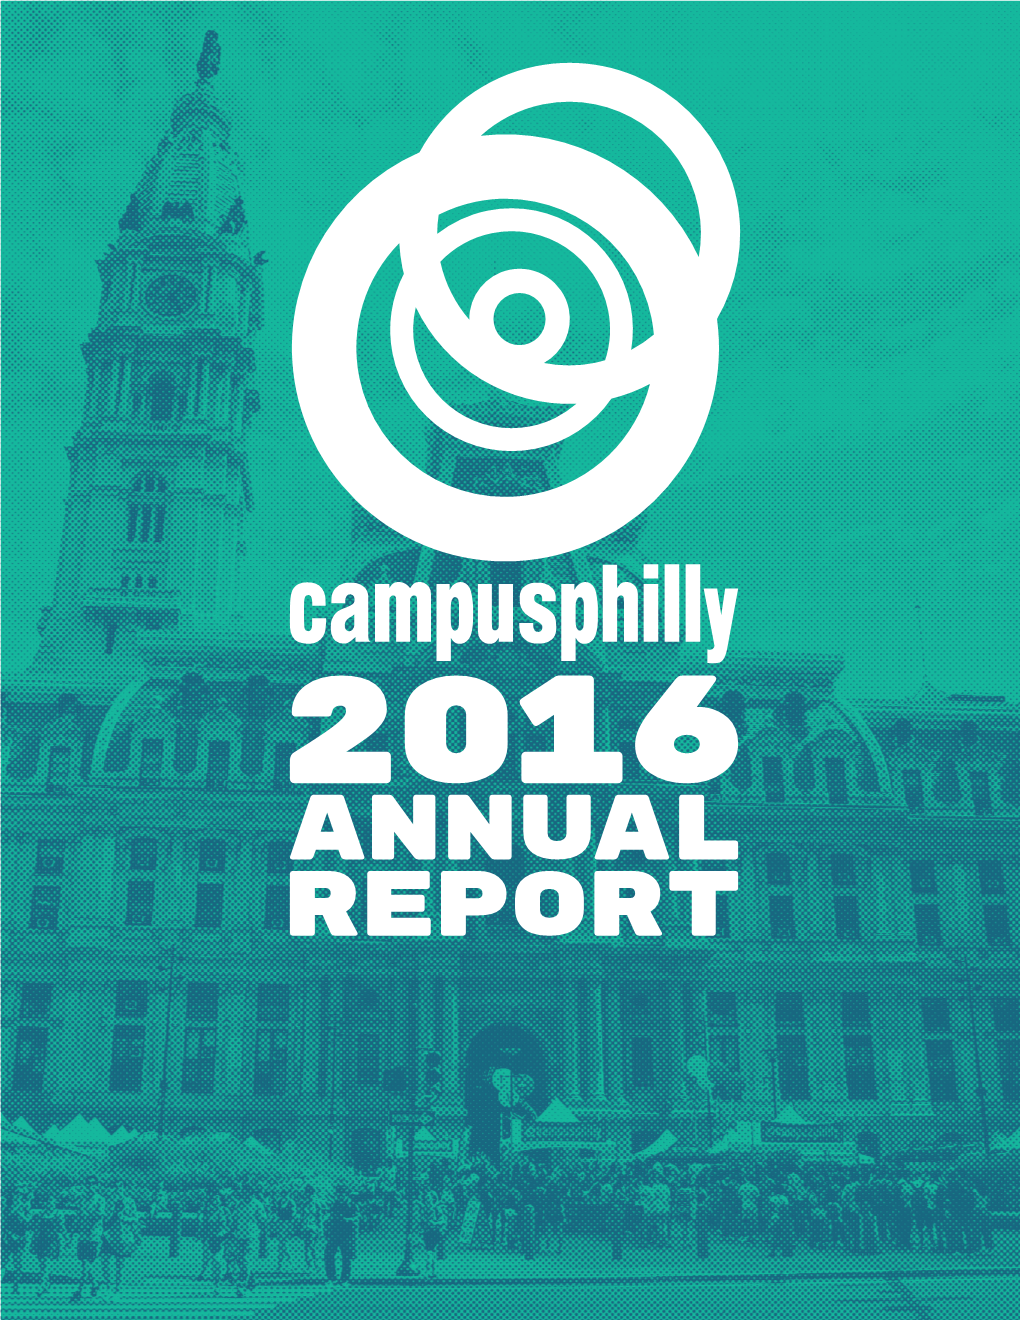 Campus Philly Brings Together Three Unique Audiences: Regional Students, Higher Education Institutions and the Business Community